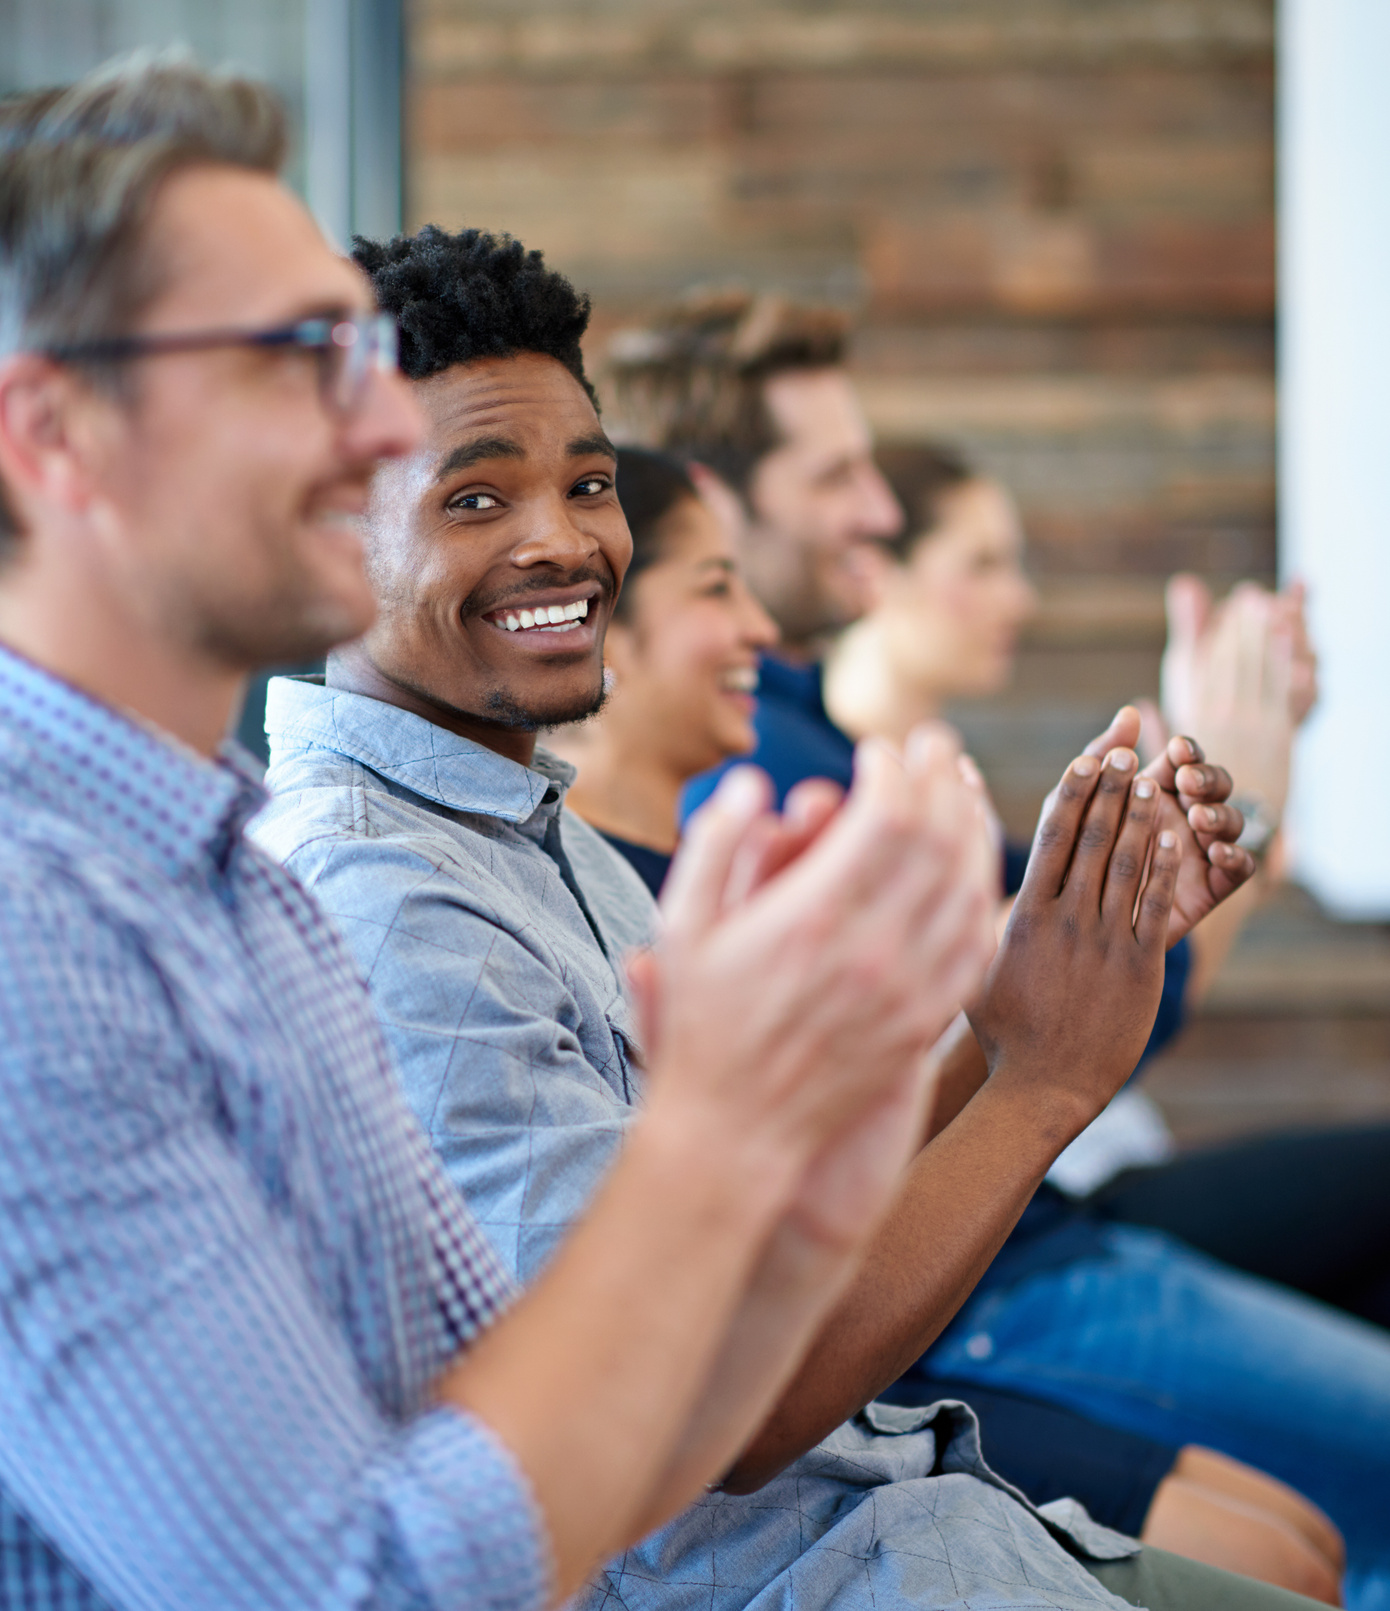 Diversity, Colleagues with Applause and in a Meeting Room of Their Workplace for Happiness. Achievement or Success, Support and Coworkers Clapping Together at Workshop or Seminar in a Boardroom